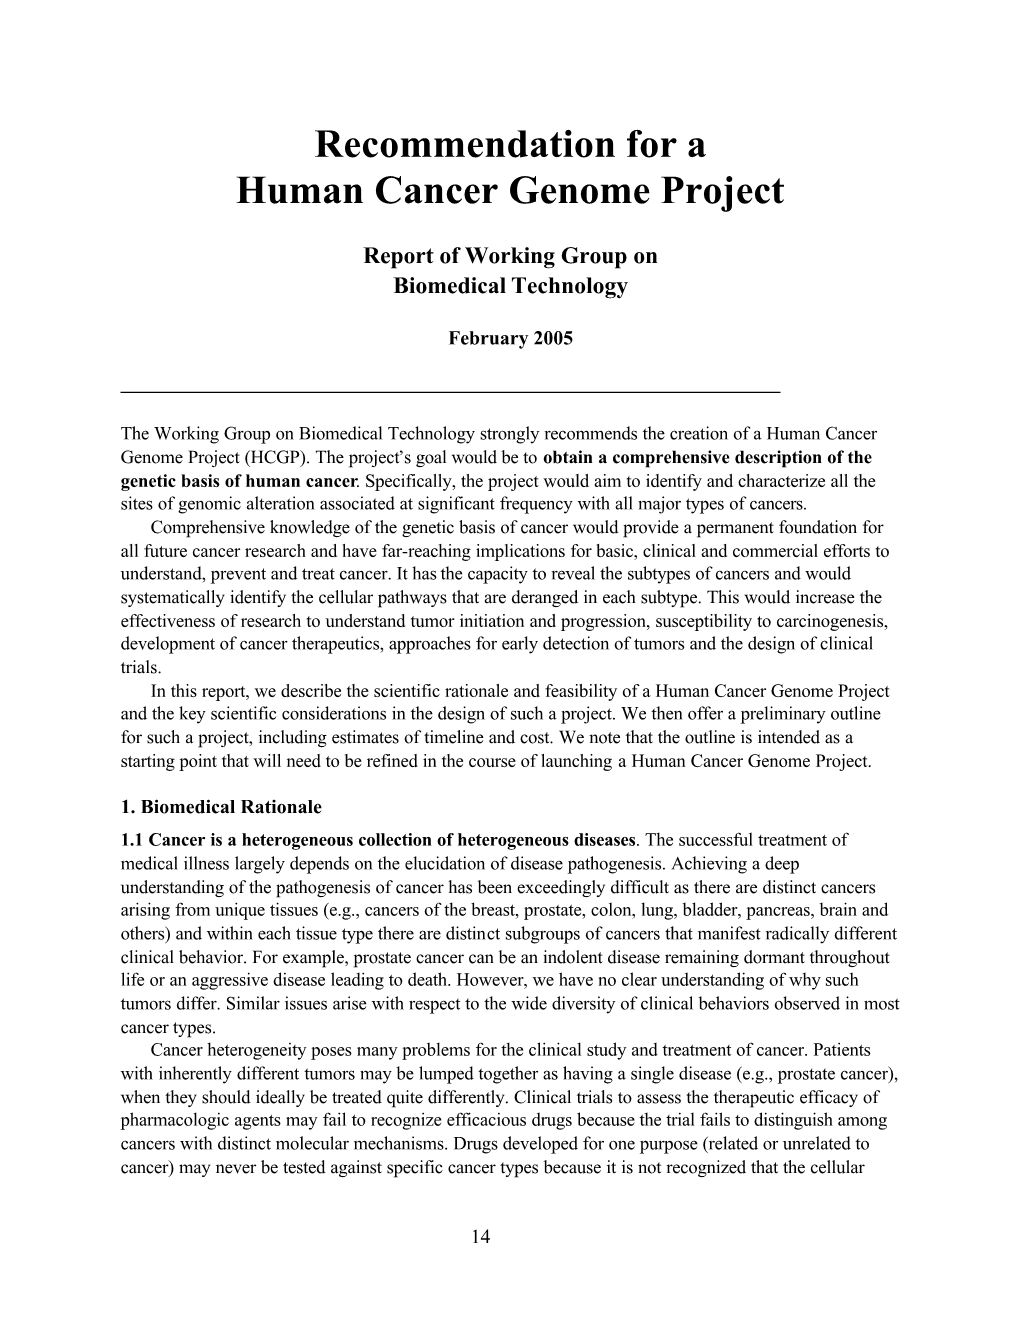 Recommendation for a Human Cancer Genome Project